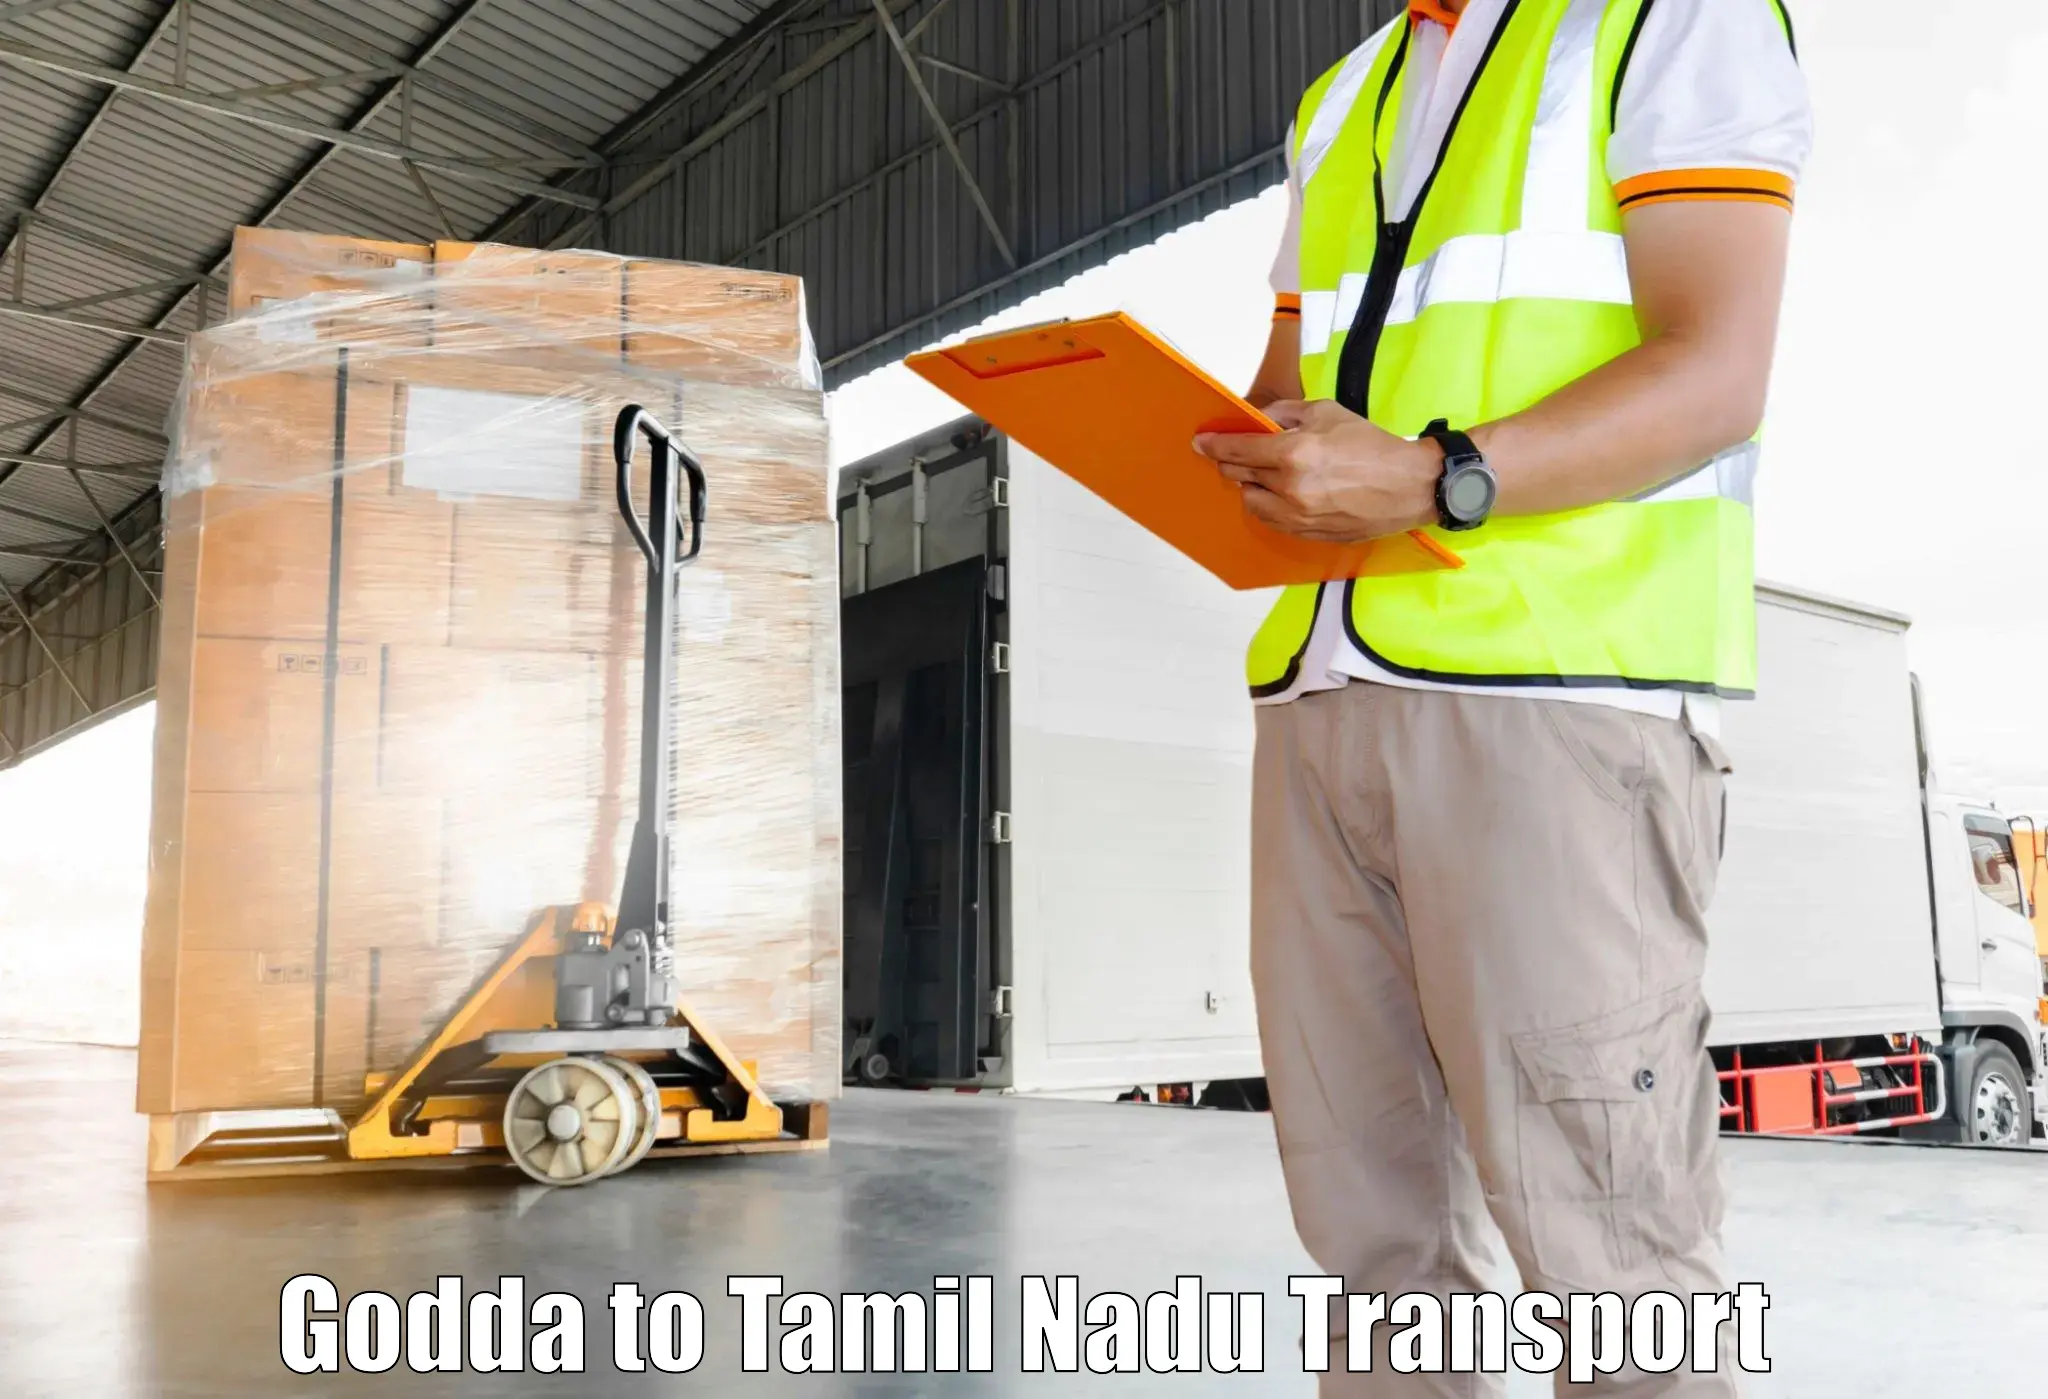 Land transport services Godda to Nagercoil